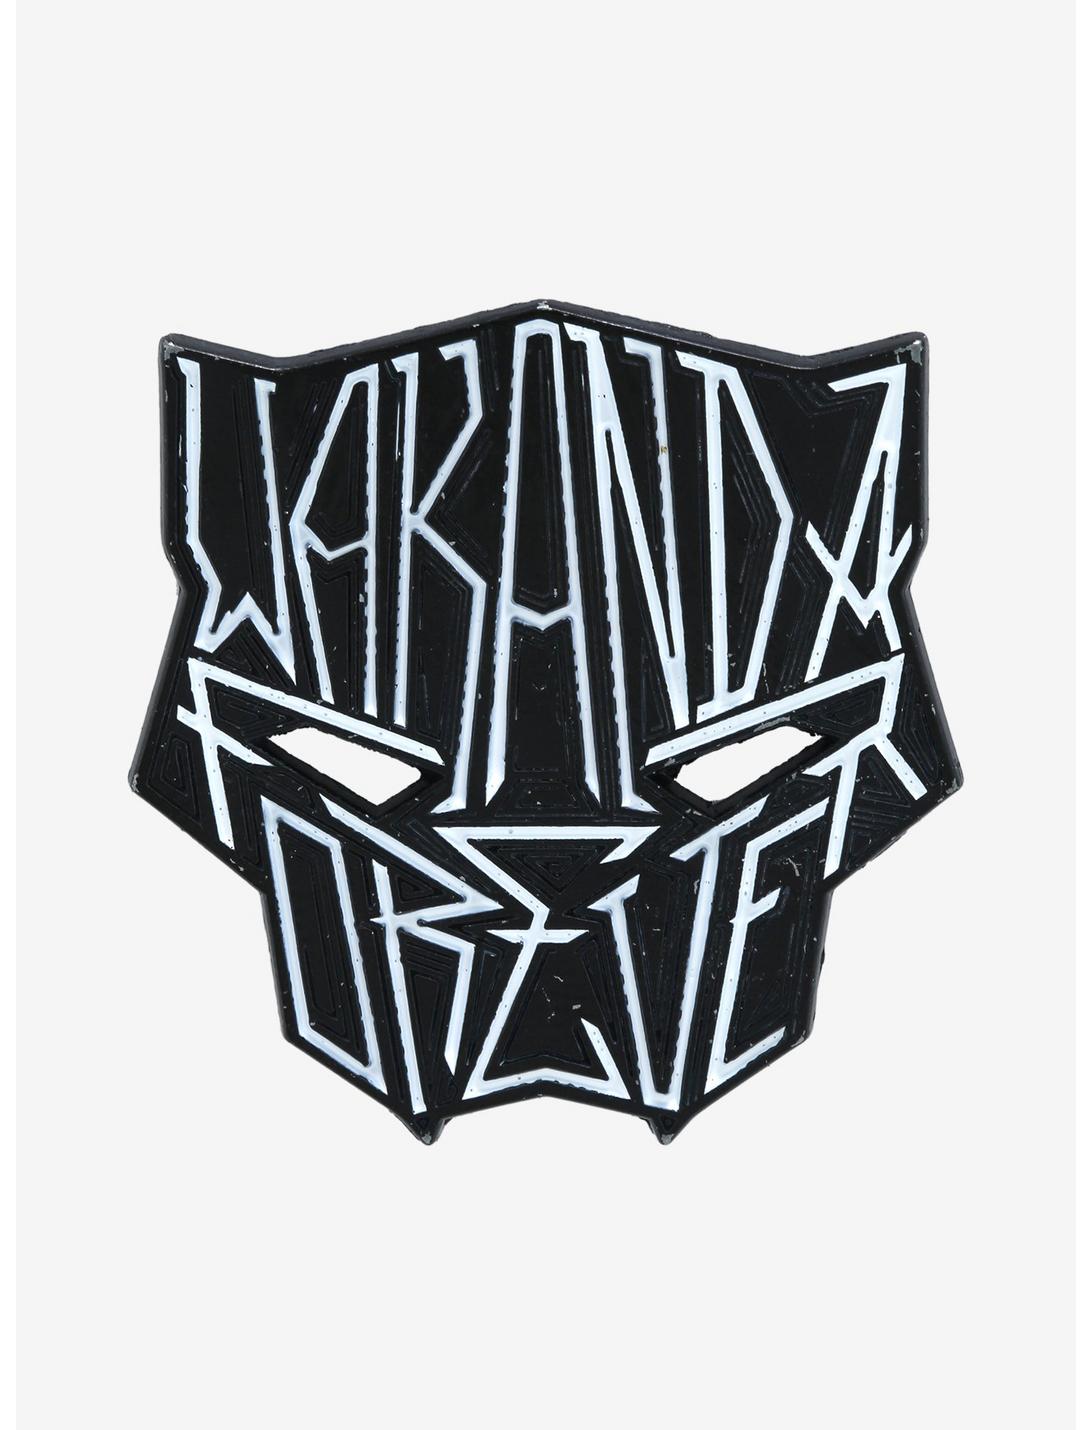 Marvel Black Panther Wakanda Forever Enamel Pin - BoxLunch Exclusive, , hi-res